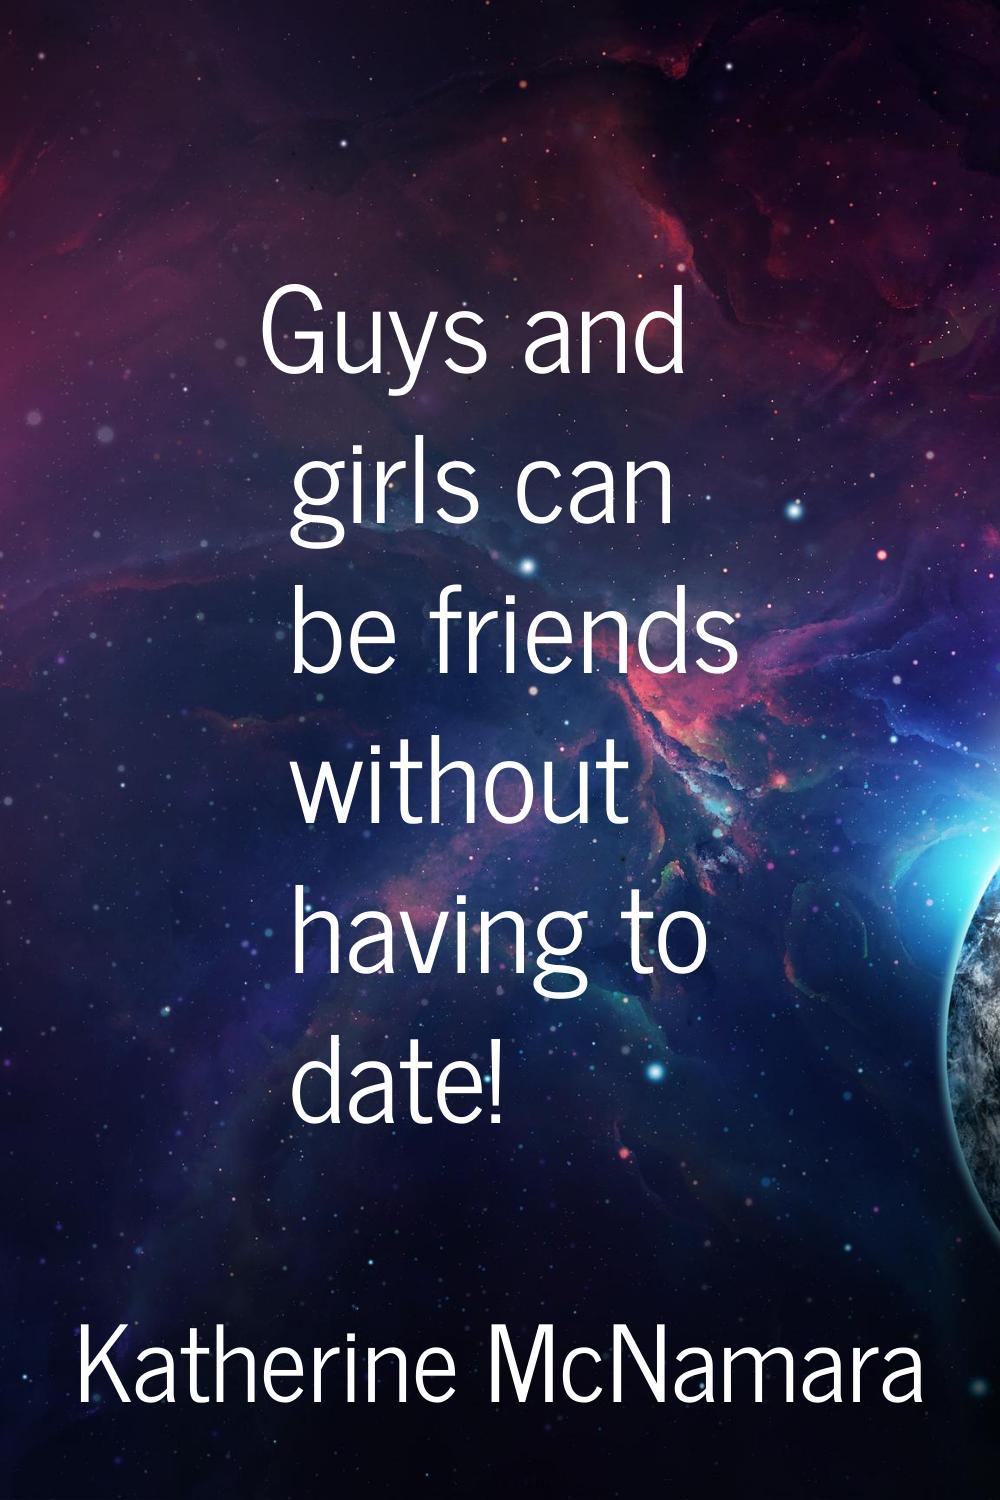 Guys and girls can be friends without having to date!